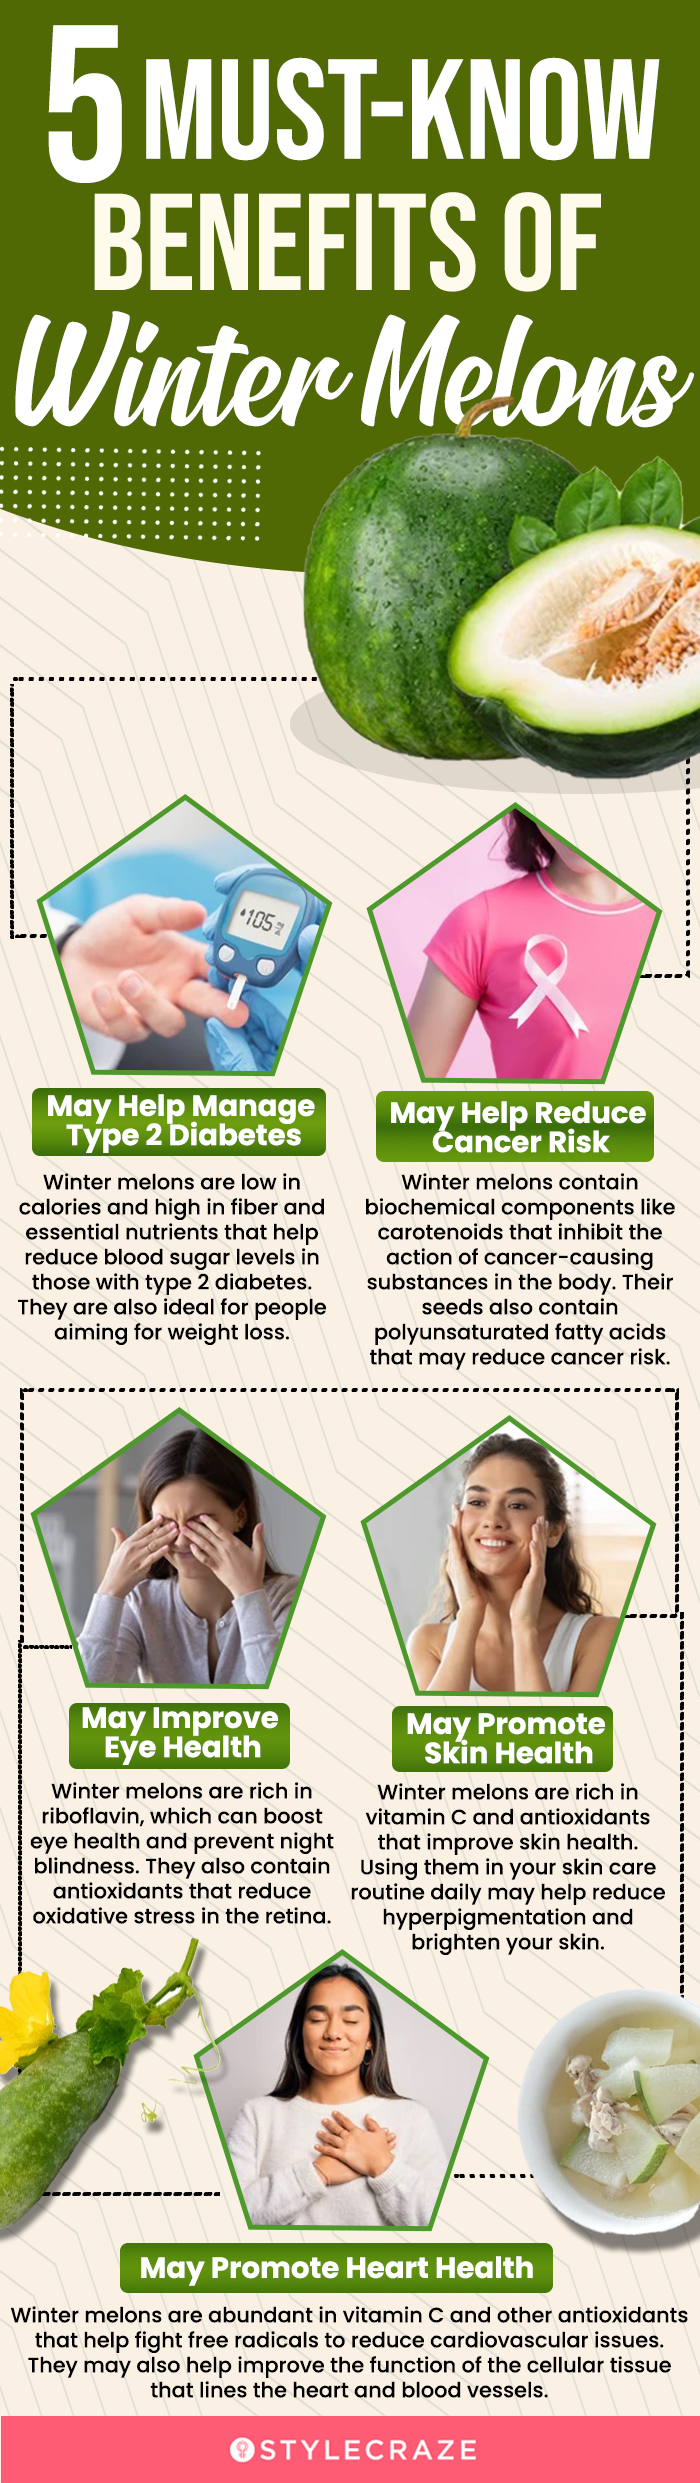 5 must-know benefits of winter melons (infographic)